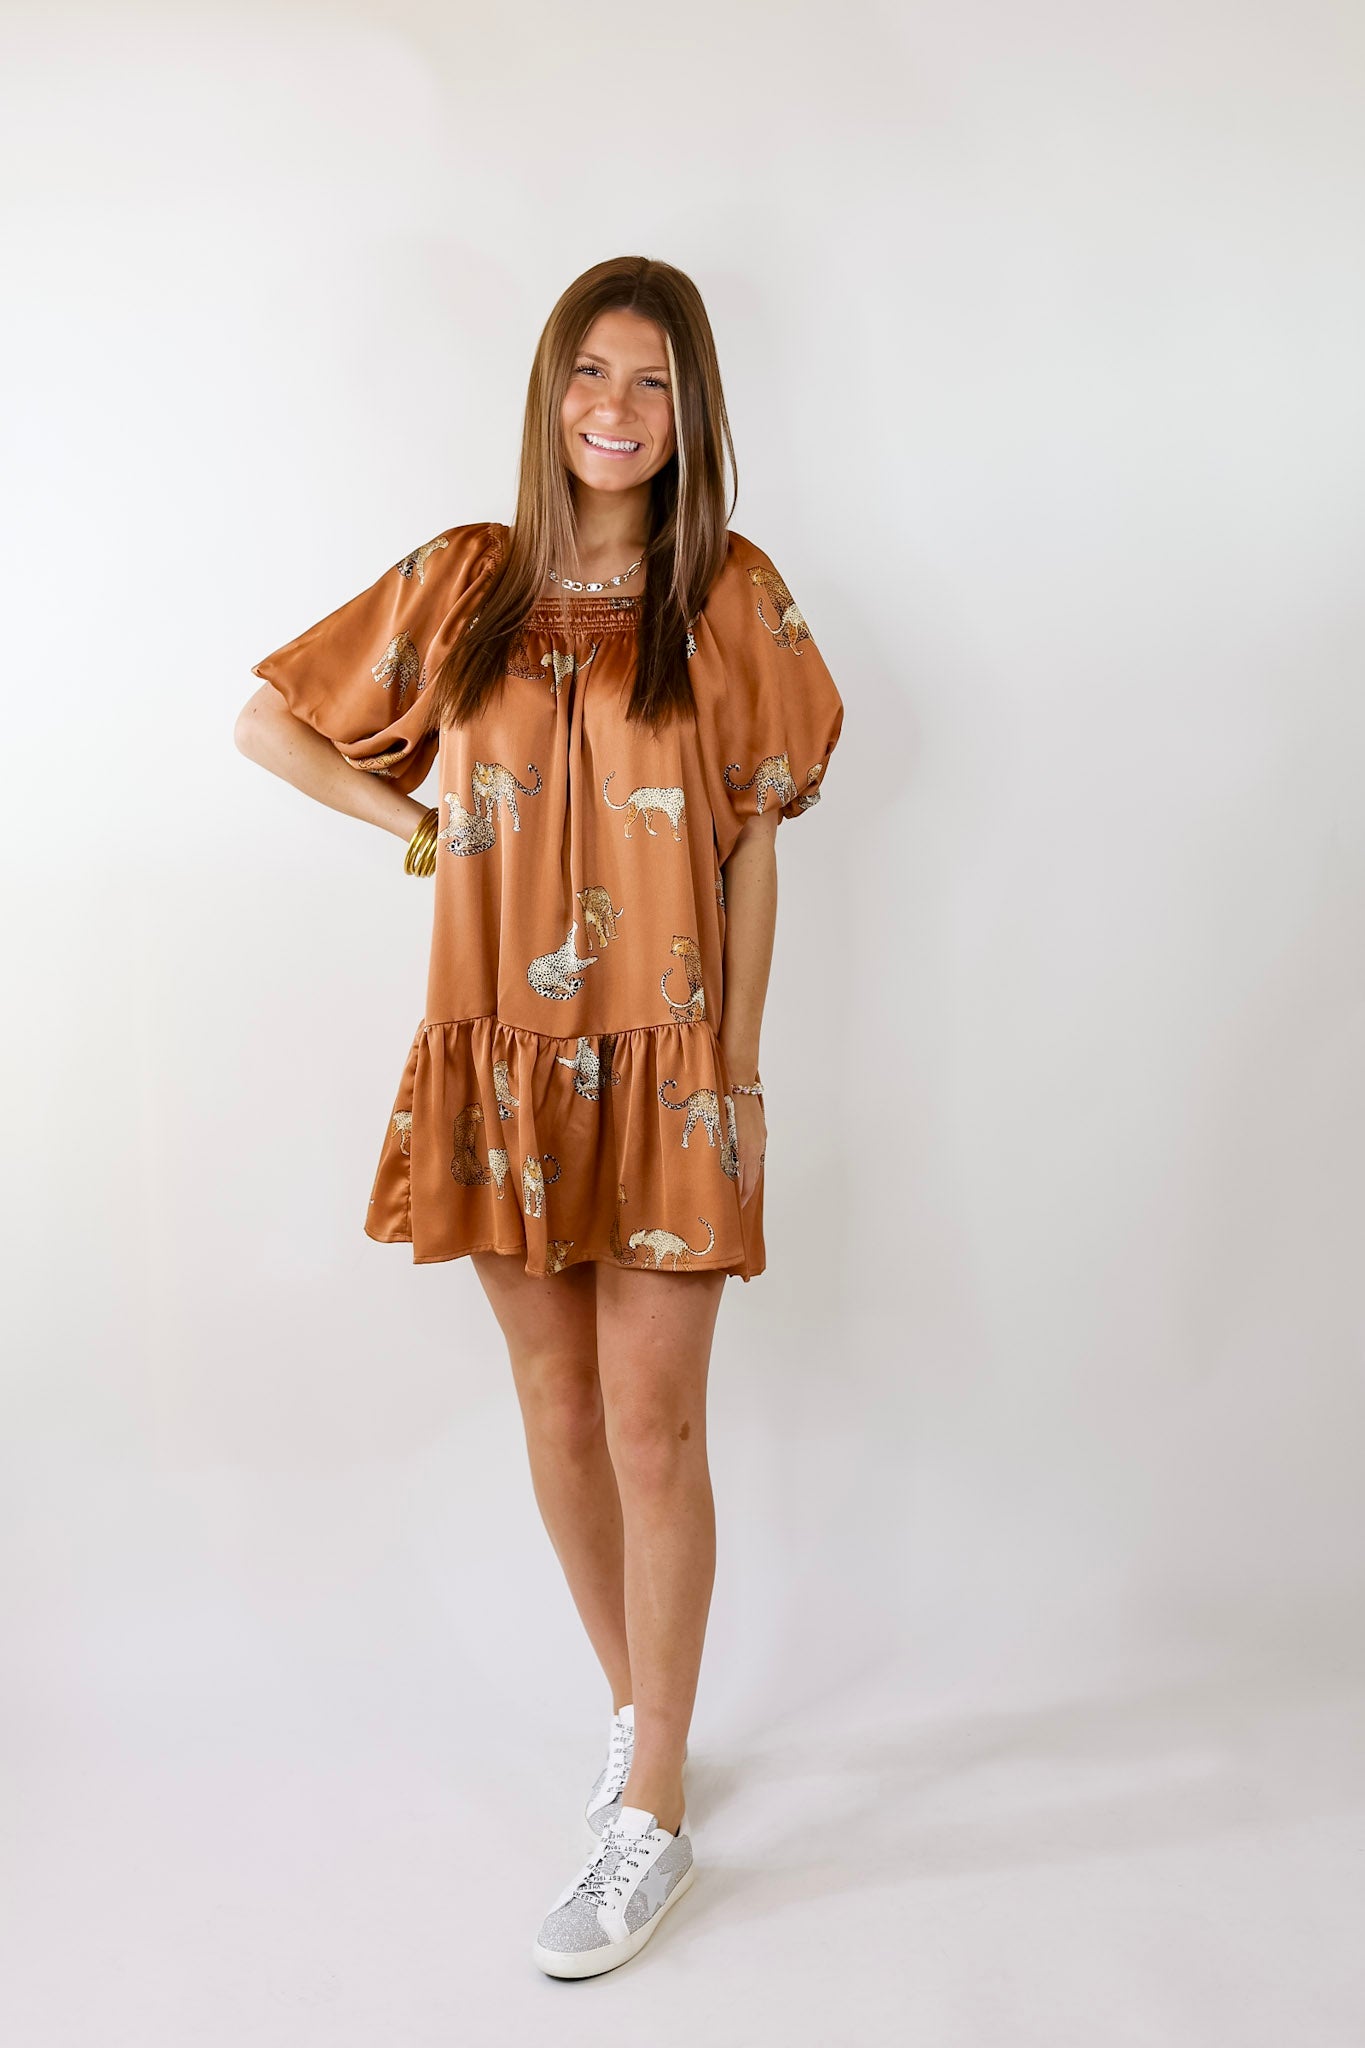 Flirting For Fun Leopard Print Satin Midi Dress in Camel Brown - Giddy Up Glamour Boutique